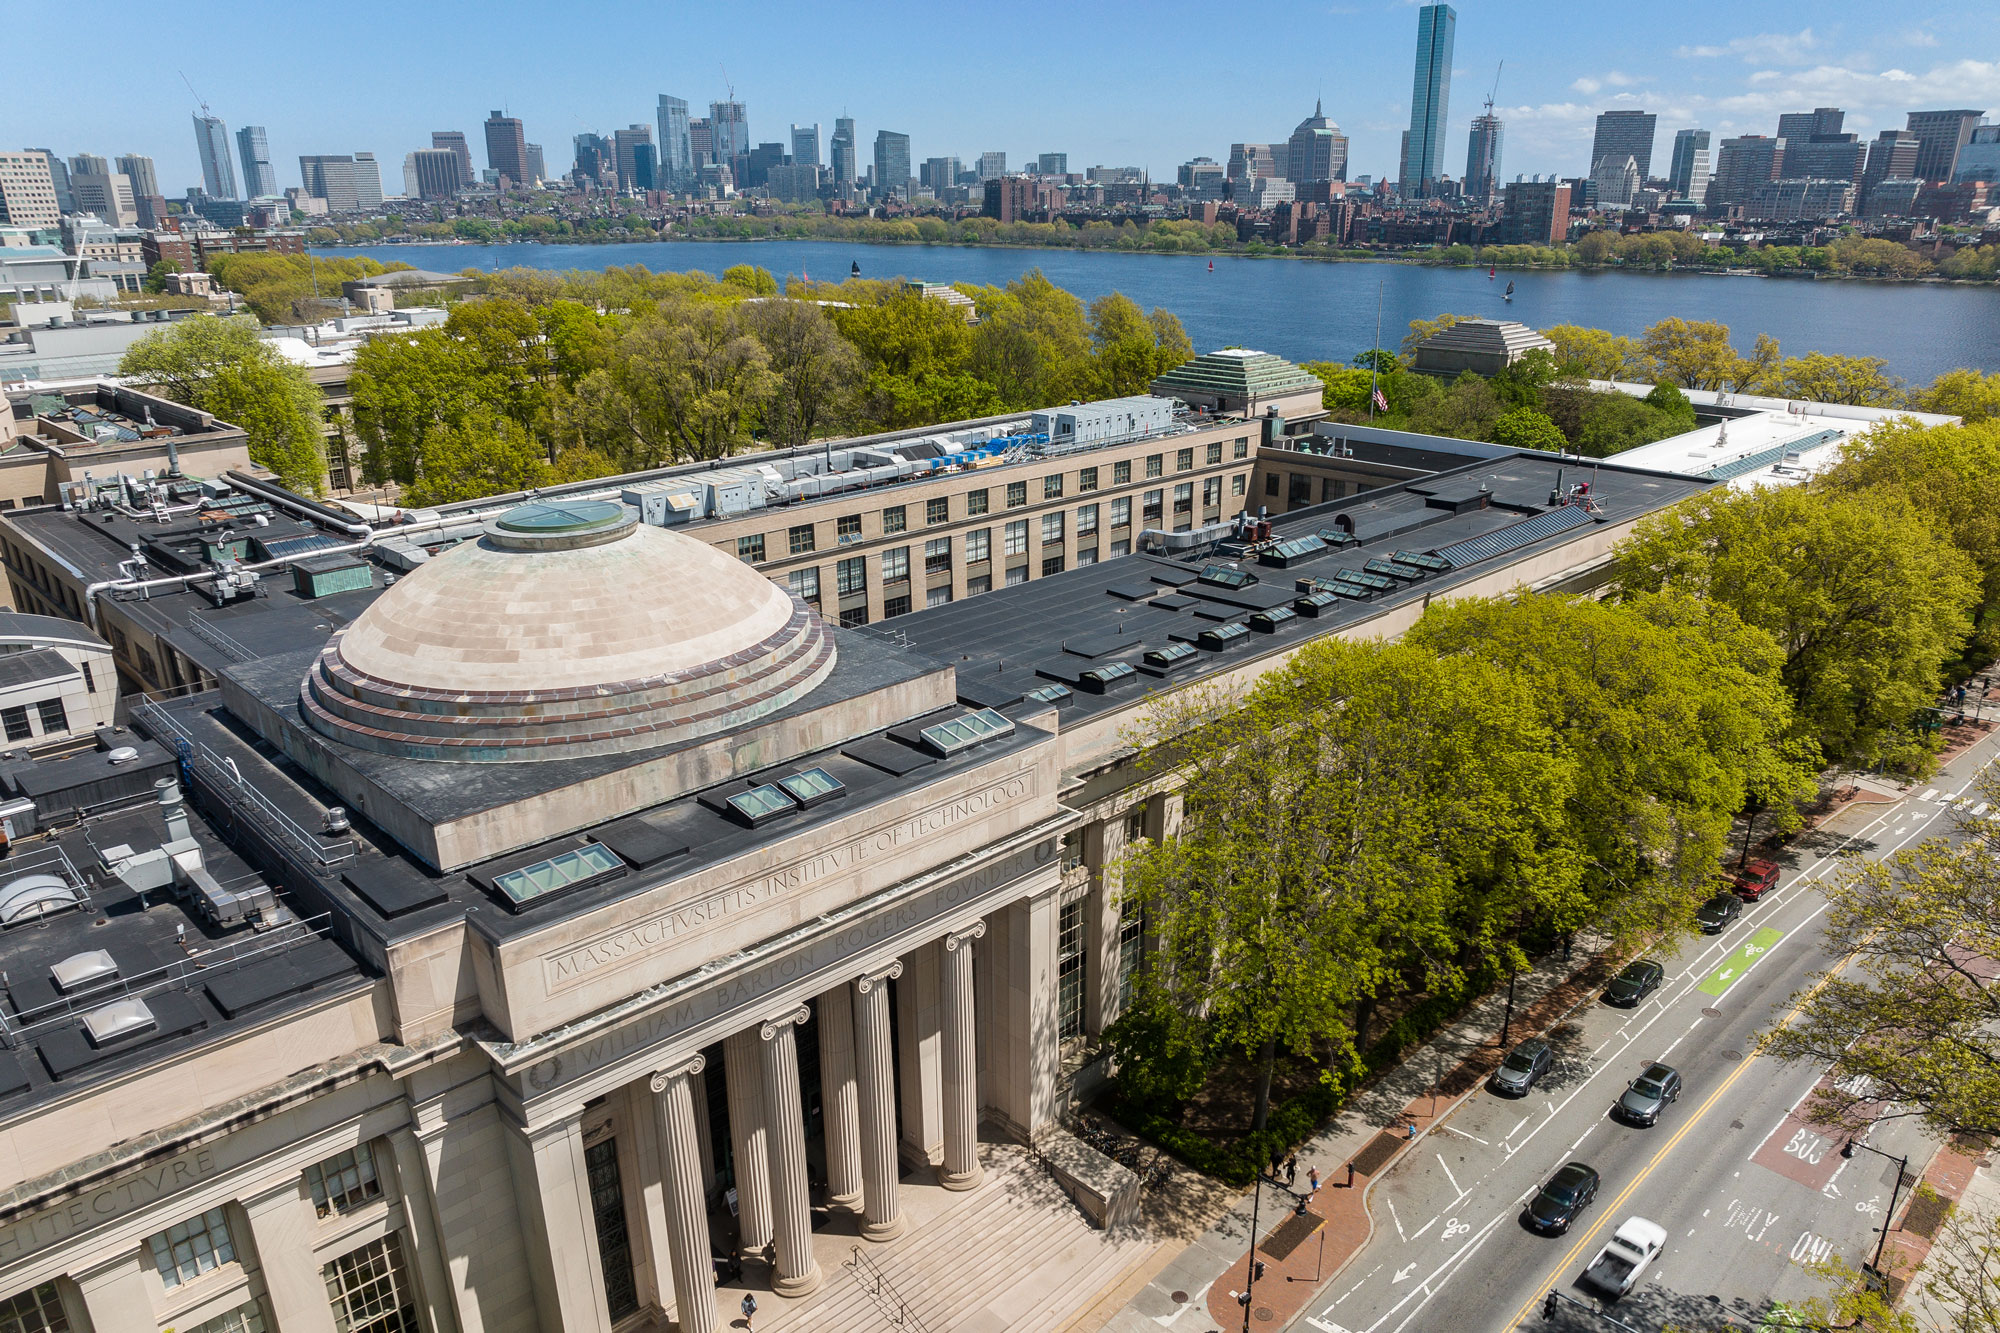 MIT graduate engineering, business, science programs ranked highly by U.S.  News for 2023-24, MIT News